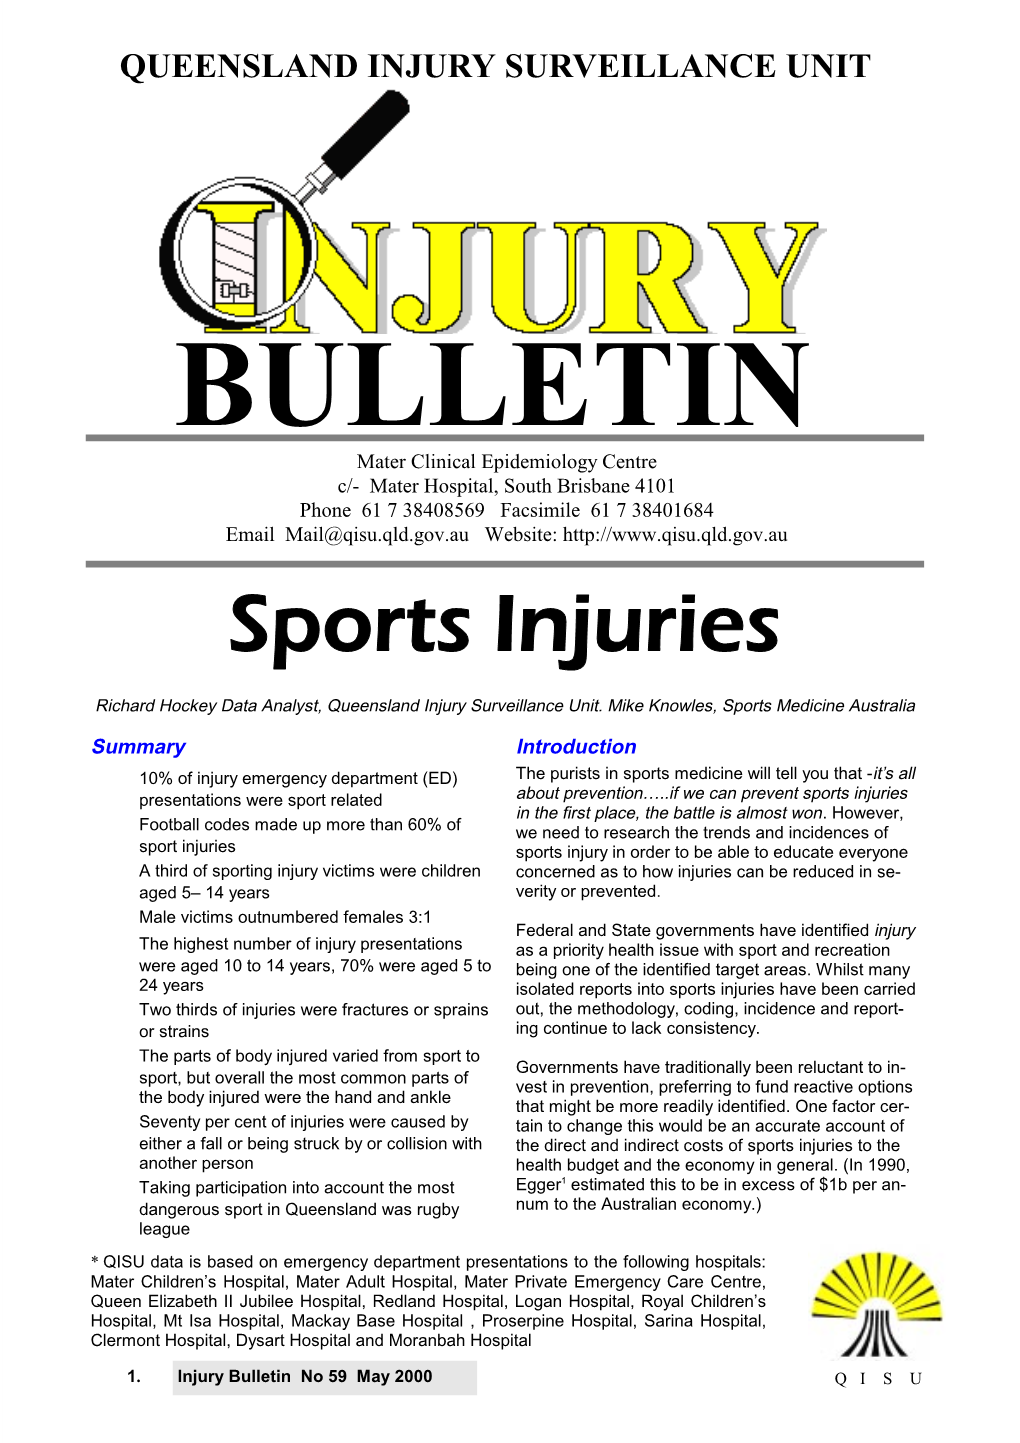 Sports Injuries ⊗ in the First Place, the Battle Is Almost Won